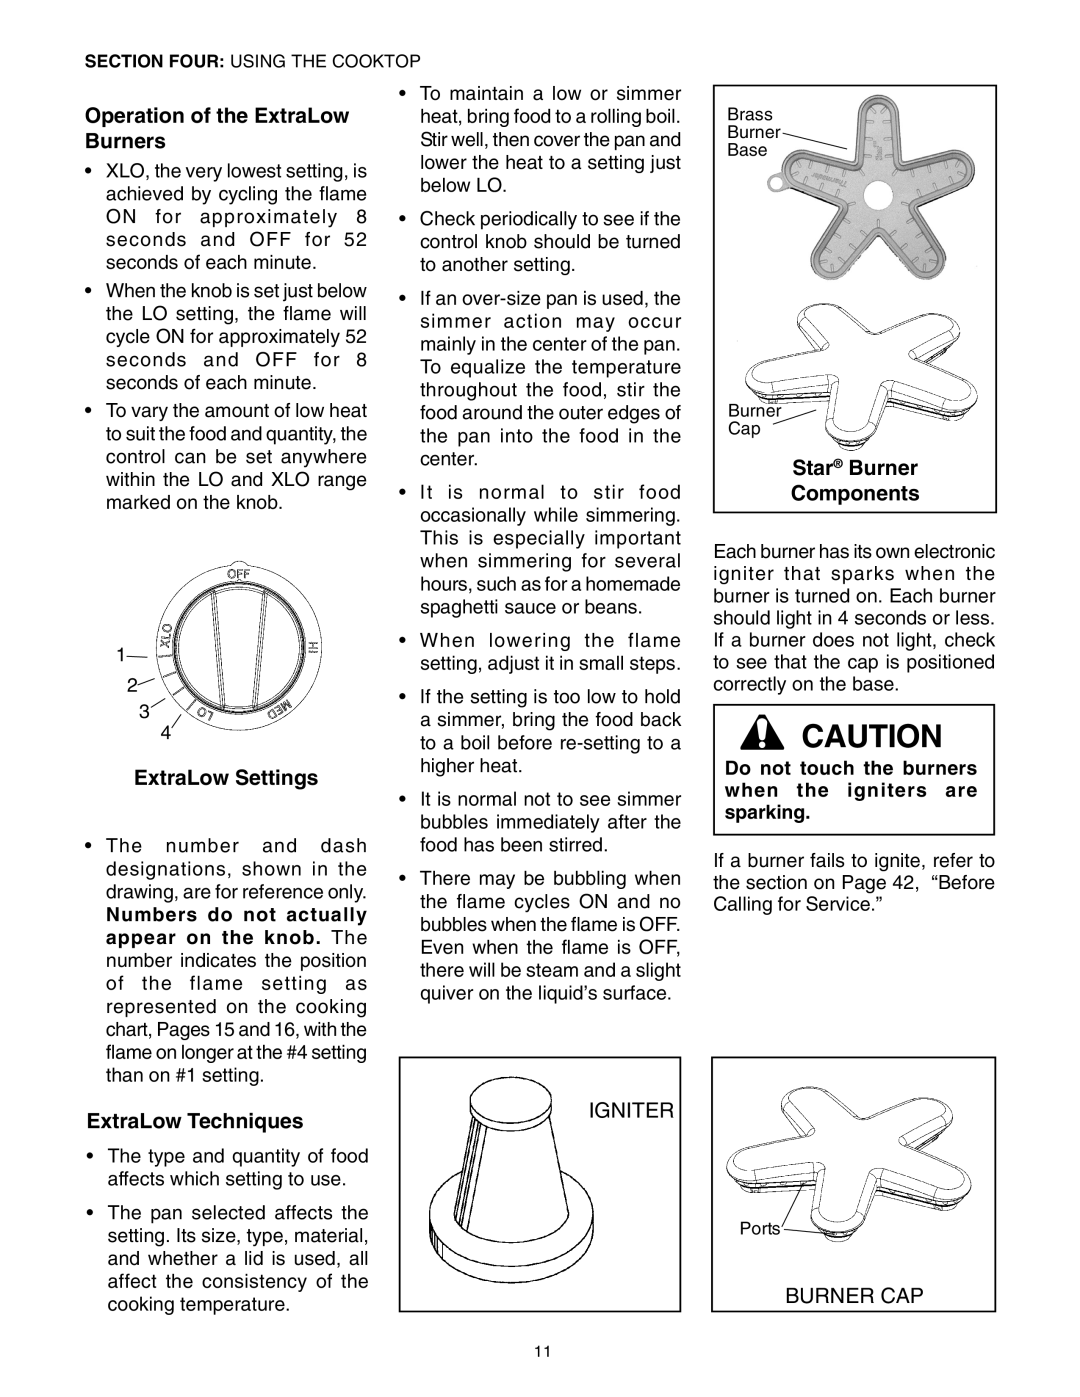 Thermador PG30 Operation of the ExtraLow Burners, ExtraLow Settings, ExtraLow Techniques, Star Burner Components, Igniter 